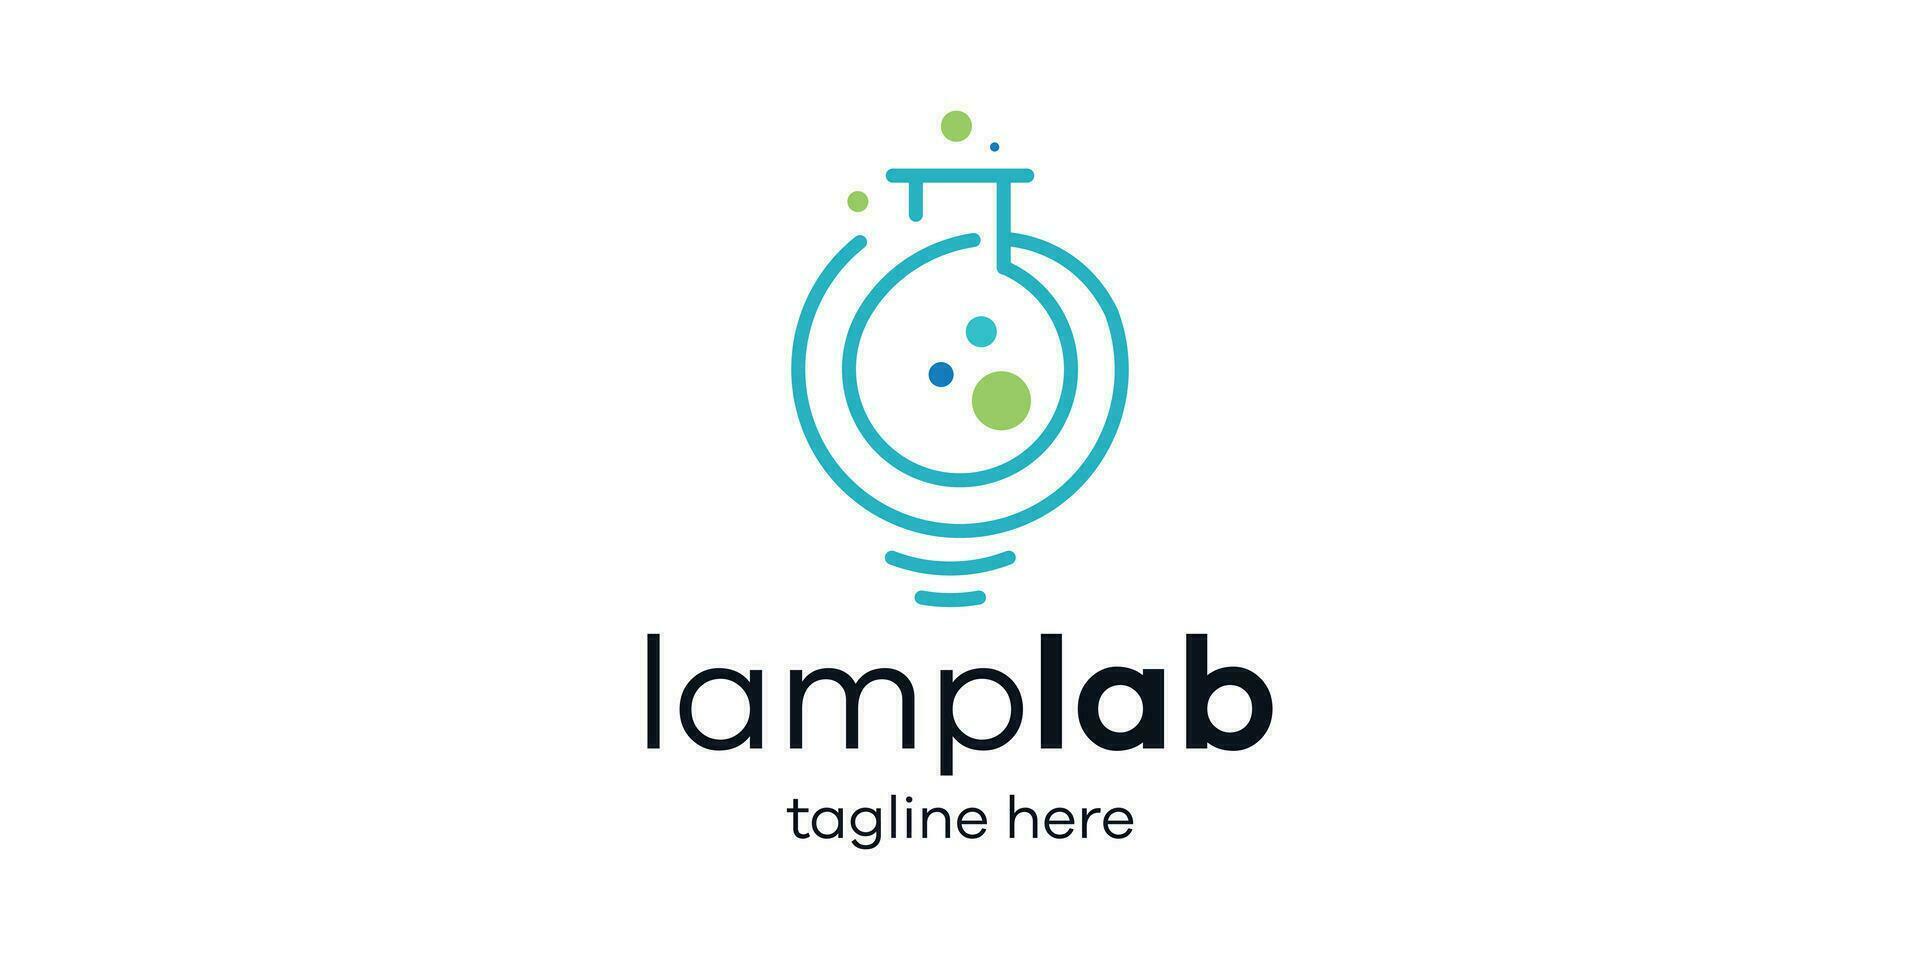 logo design combining the shape of a lamp with a lab tube, minimalist line logo design. vector